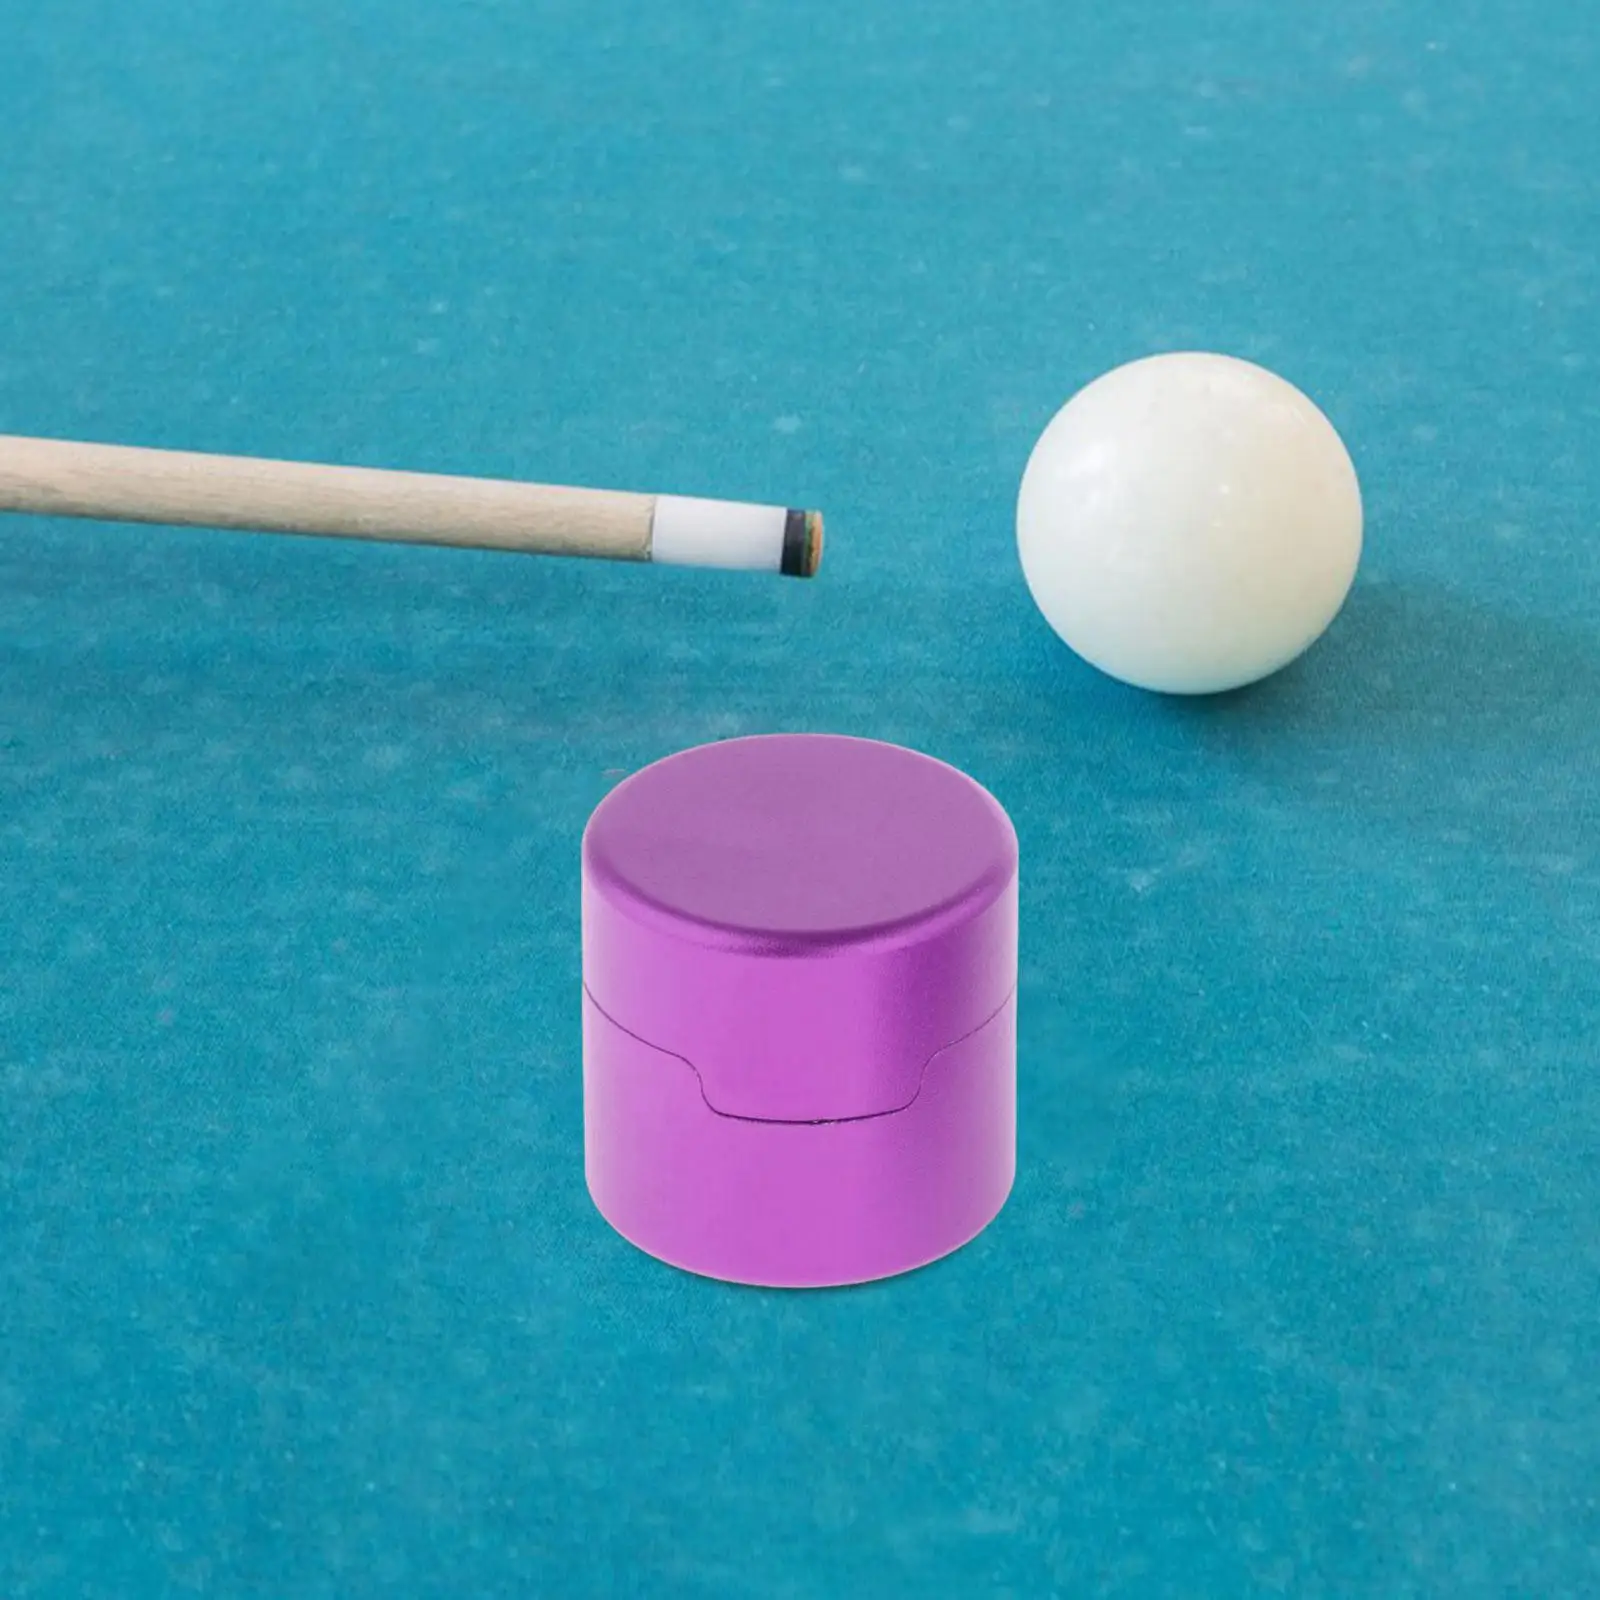 Pool Cue Chalk Holder Easy to Carry Carrier Case Cup Box Mini Round Shaped Billiards Accessories Chalk Holder Practical Tool